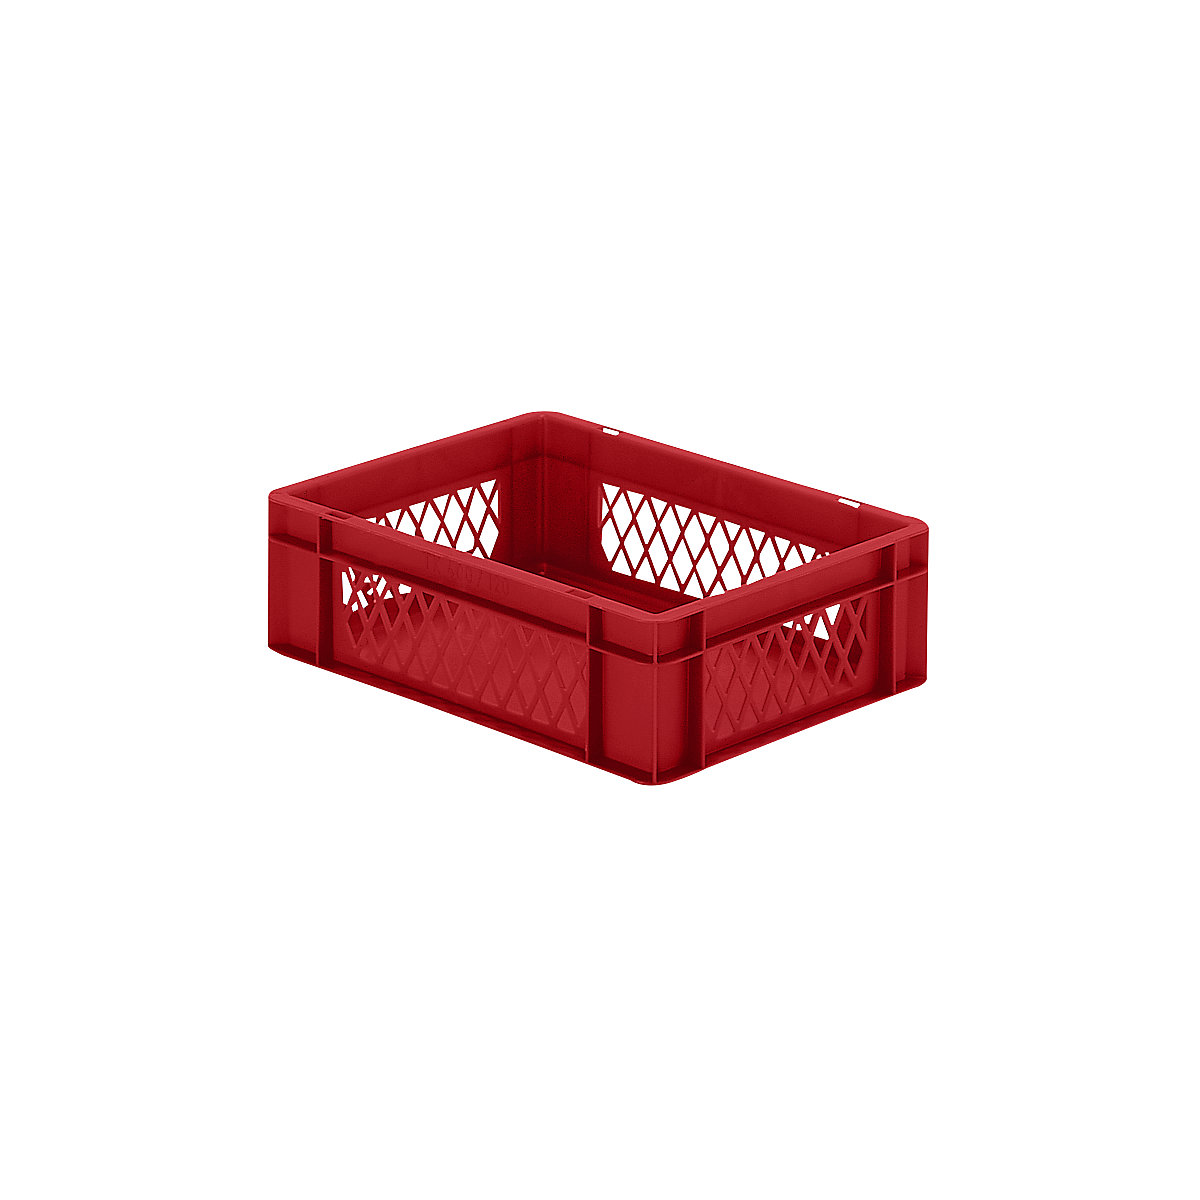 Euro stacking container, perforated walls, closed base, LxWxH 400 x 300 x 120 mm, red, pack of 5